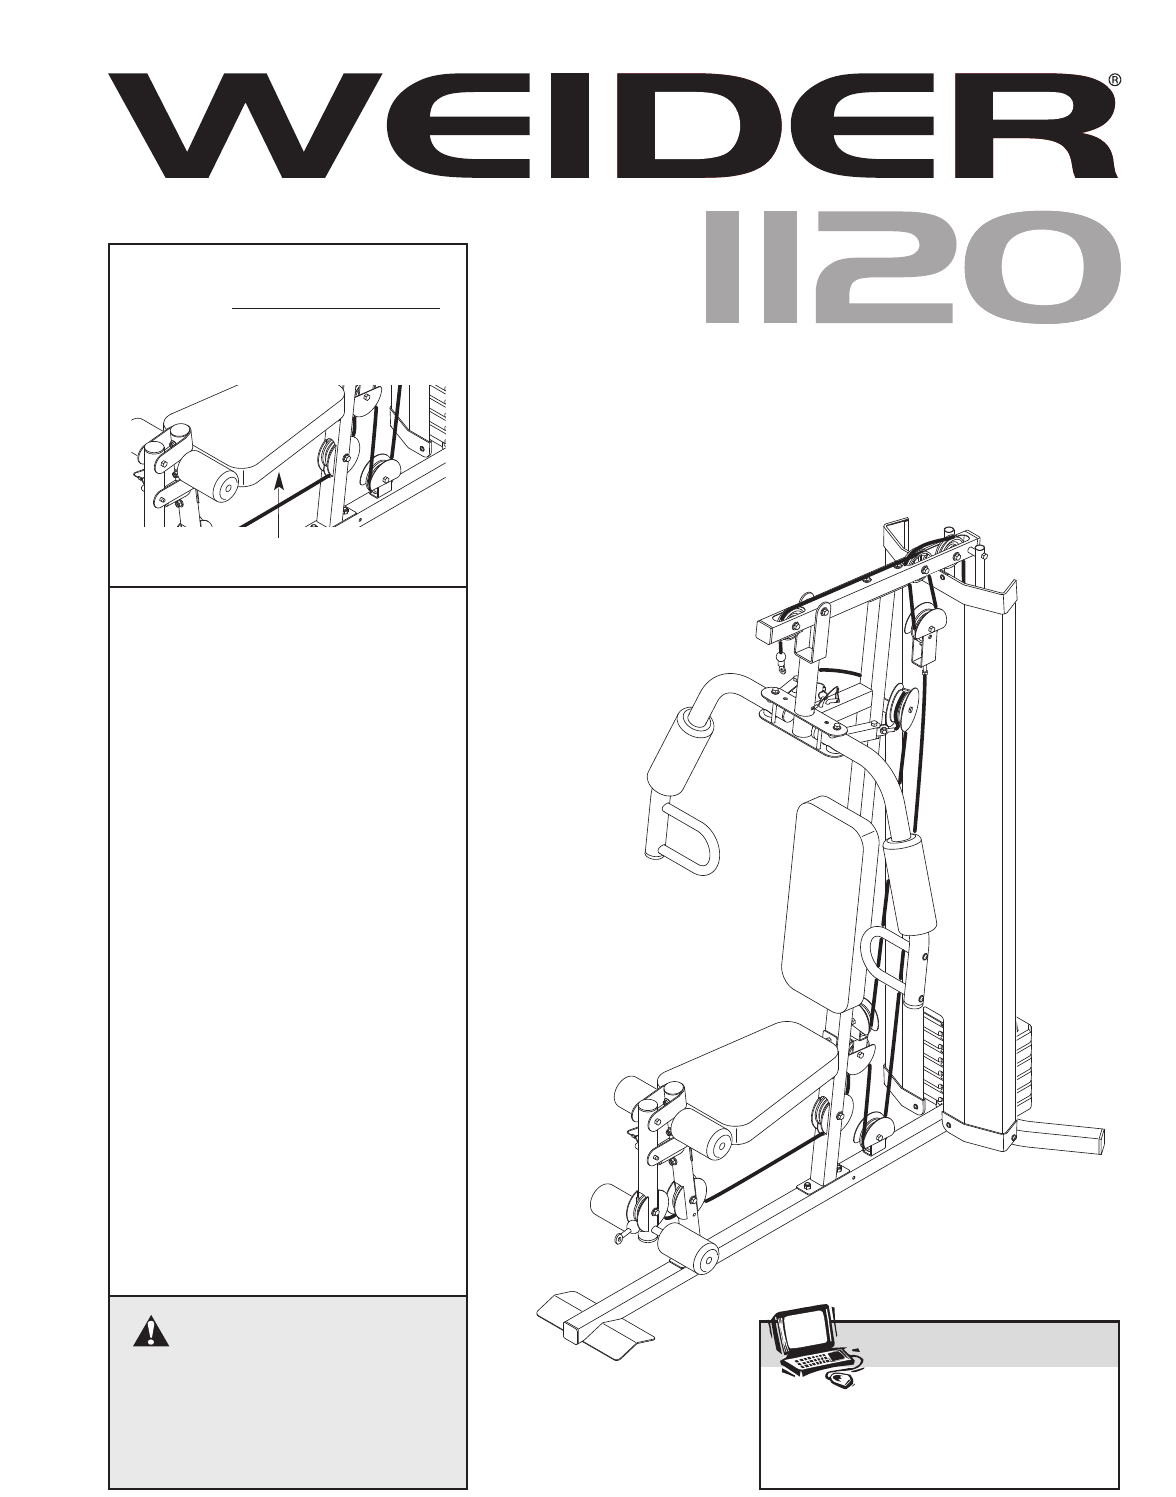 Weider 1120 Home Gym Exercise Chart